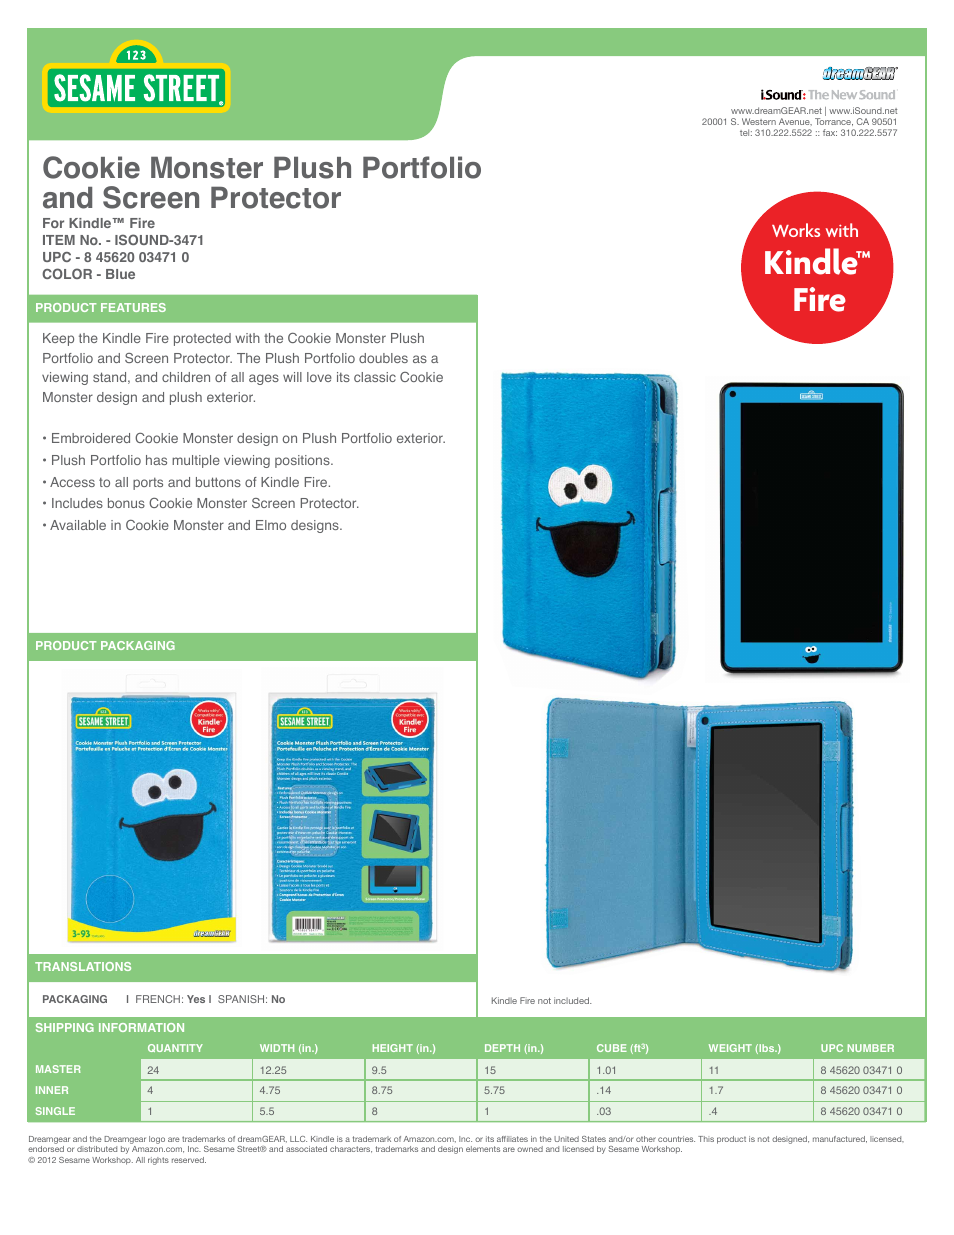 Cookie Monster Plush Portfolio and Screen Protector for Kindle Fire - Sell Sheet